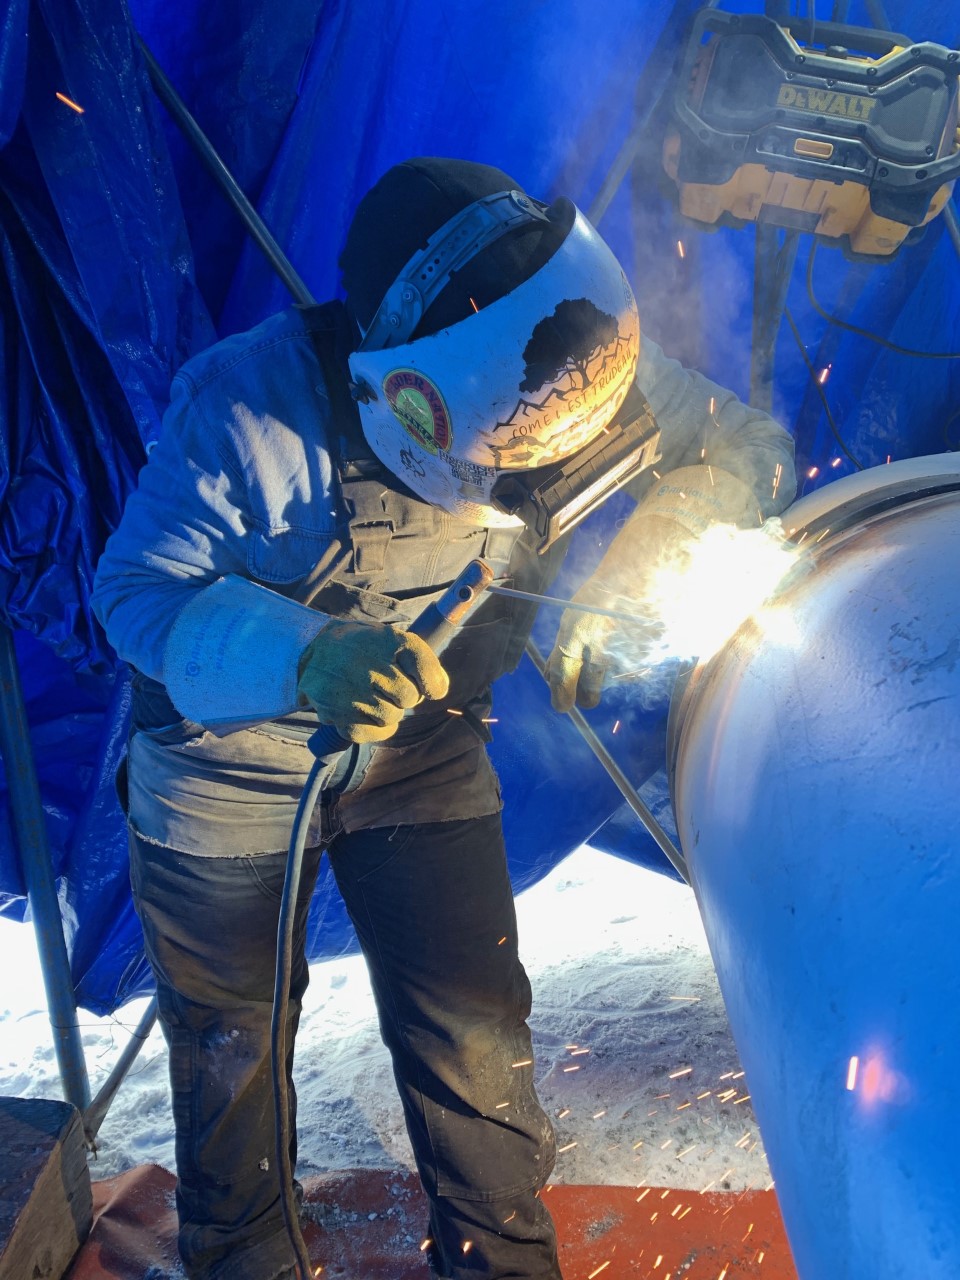 Joelle Milne welding a pipe. She wears full PPE including hood. Blue tent is in the background.